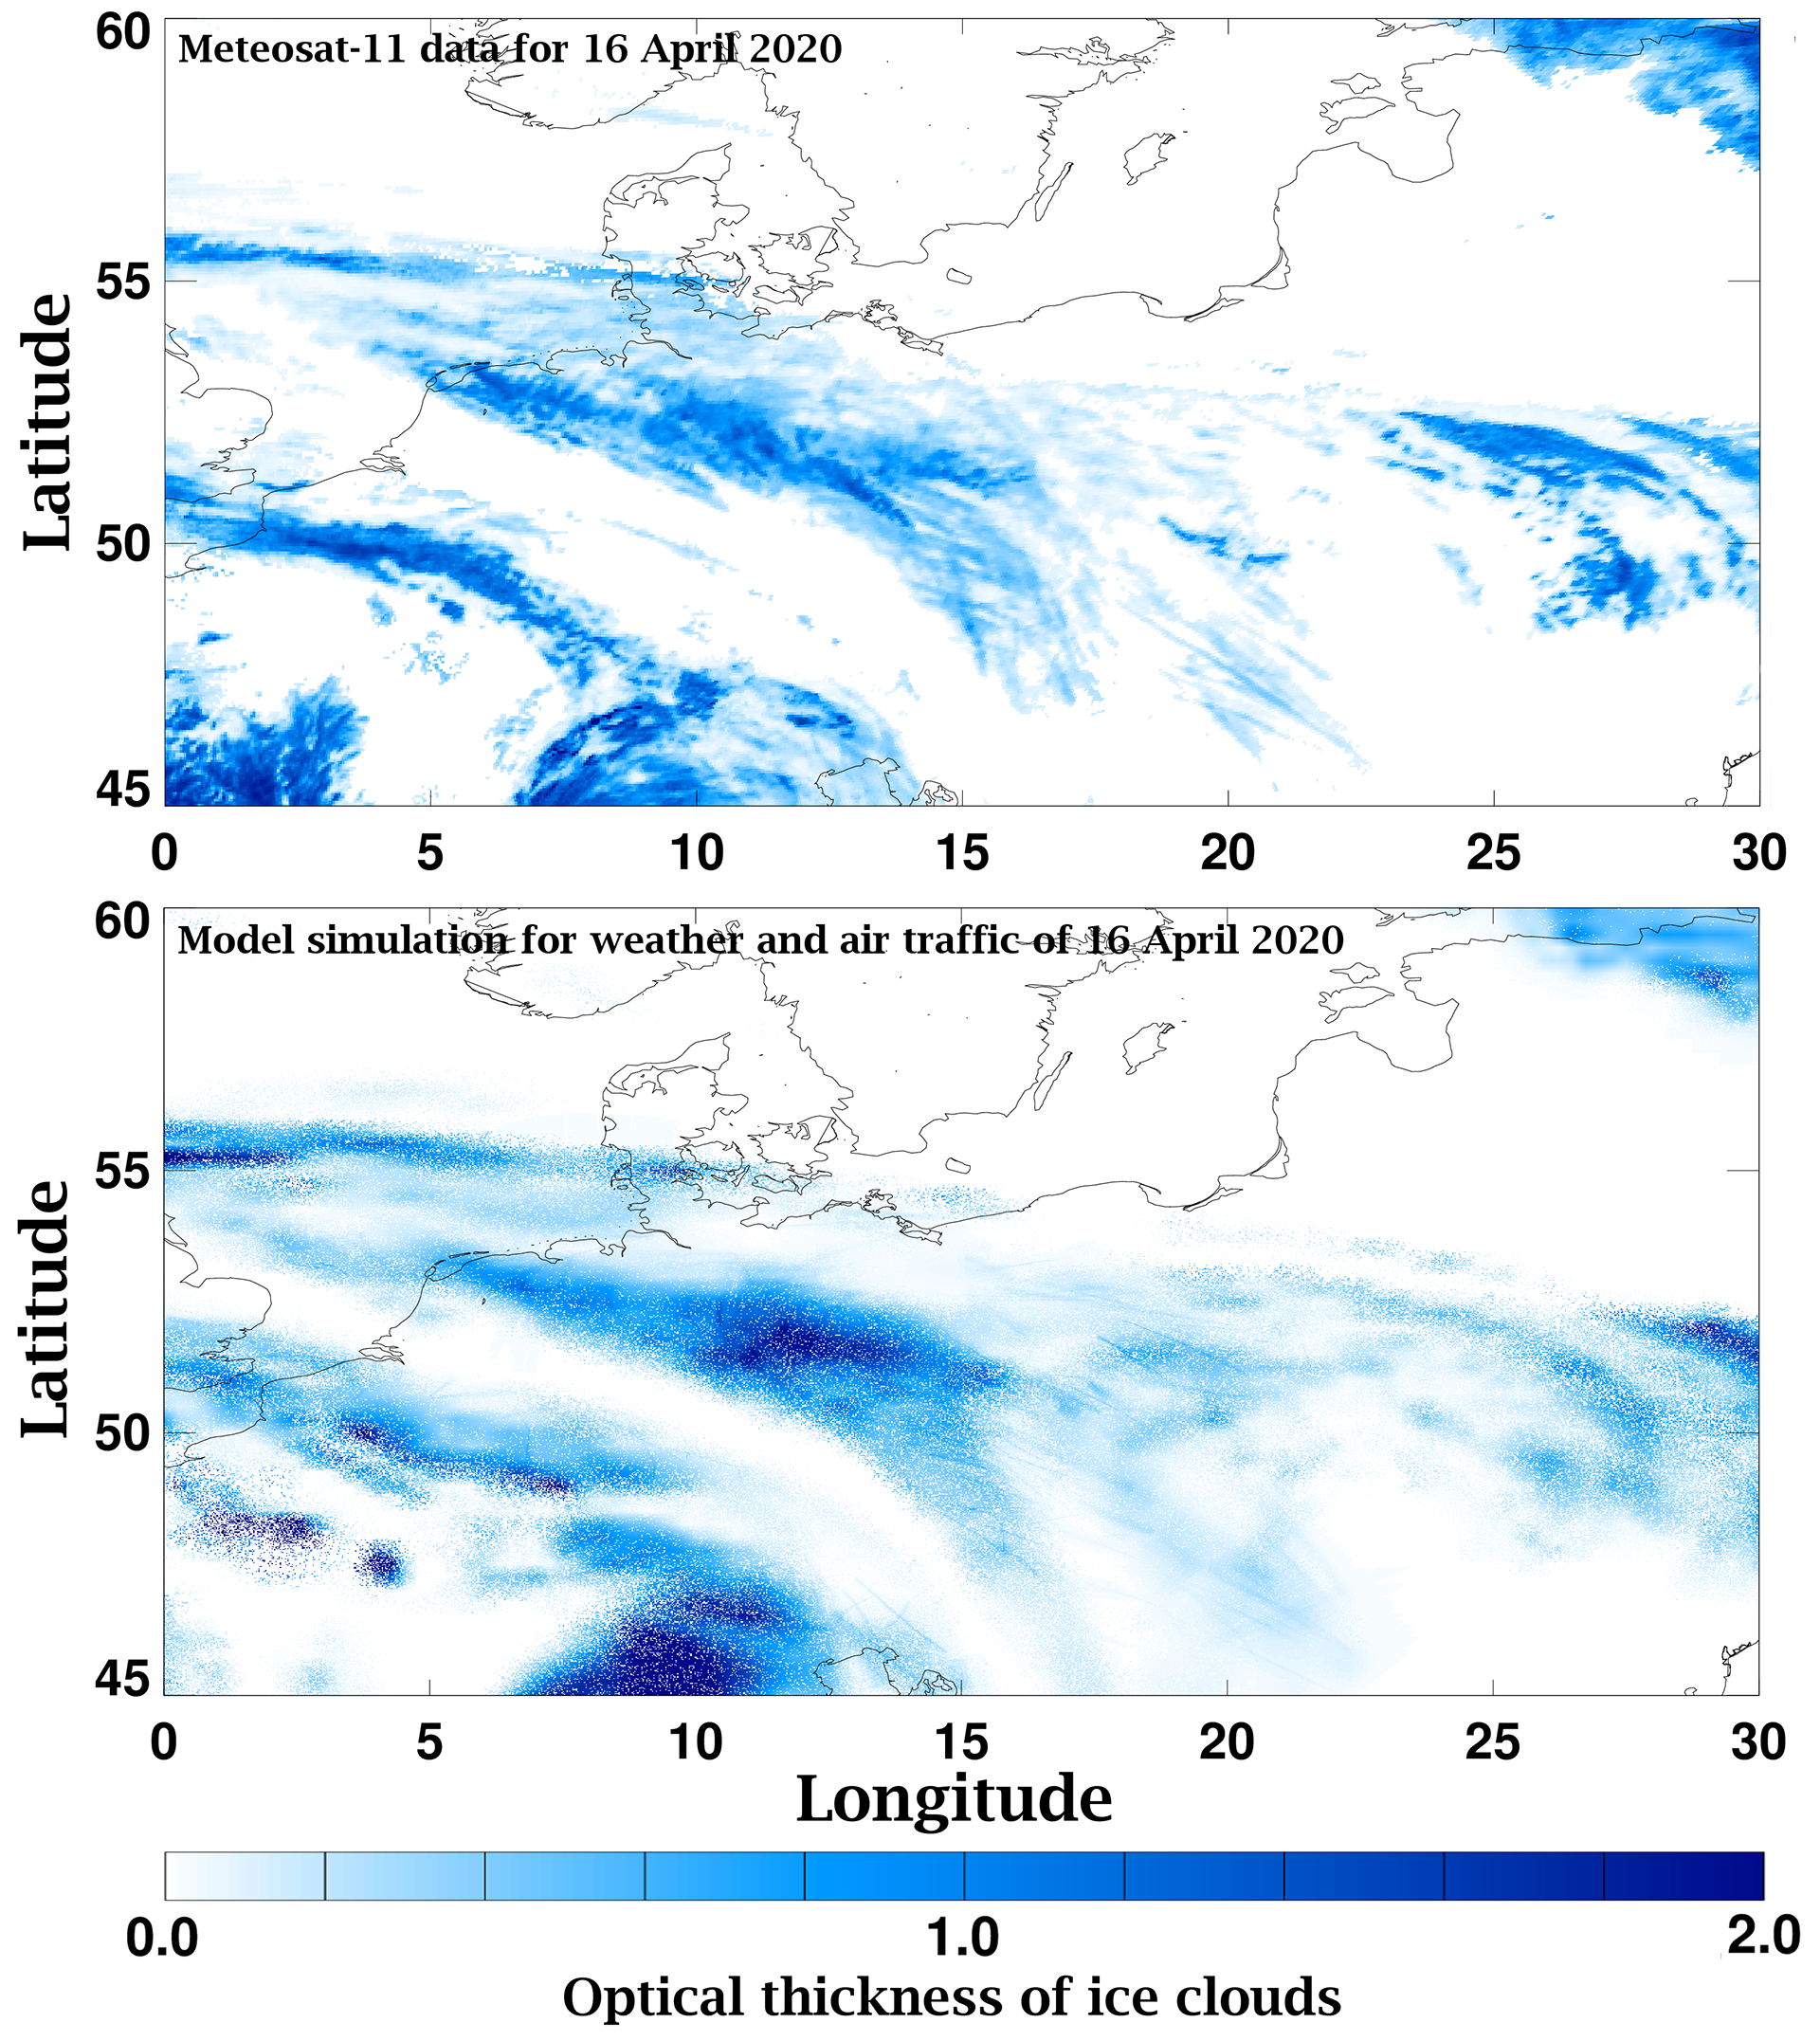 Meteosat-11 satellite data compared with a model for the optical thickness of ice clouds